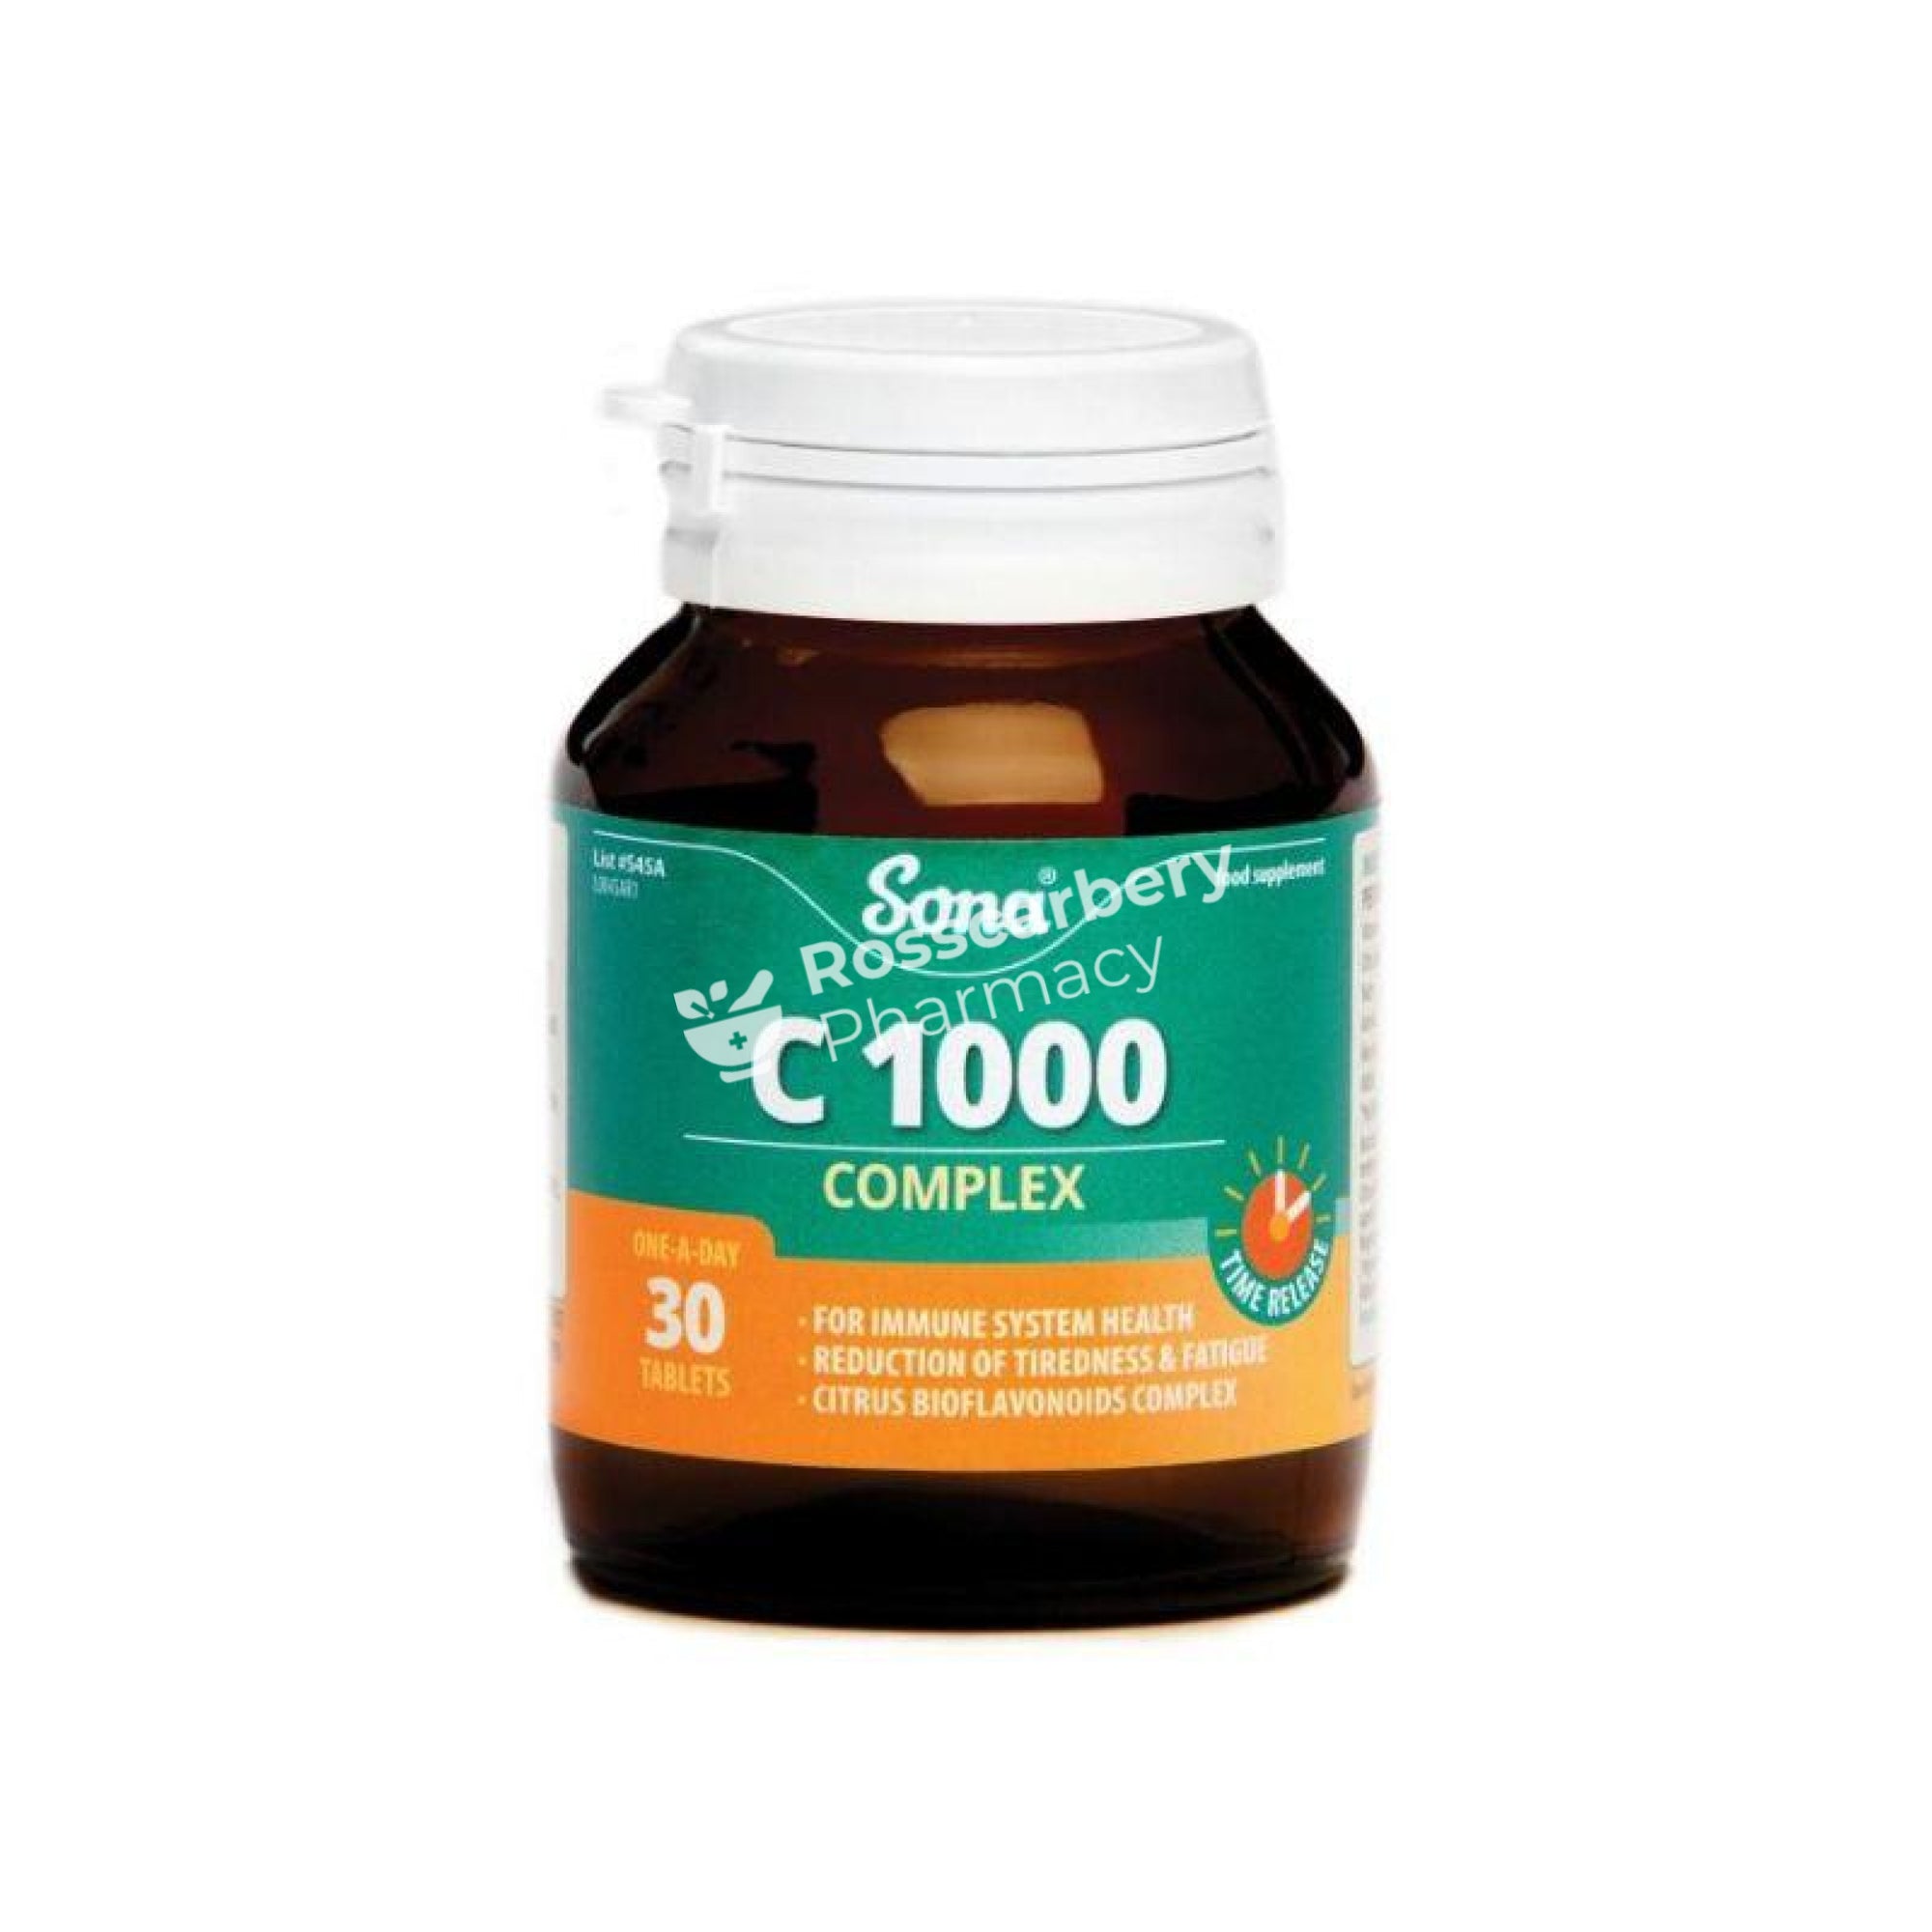 Sona - C 1000 Complex One-A-Day Skin Hair & Nails